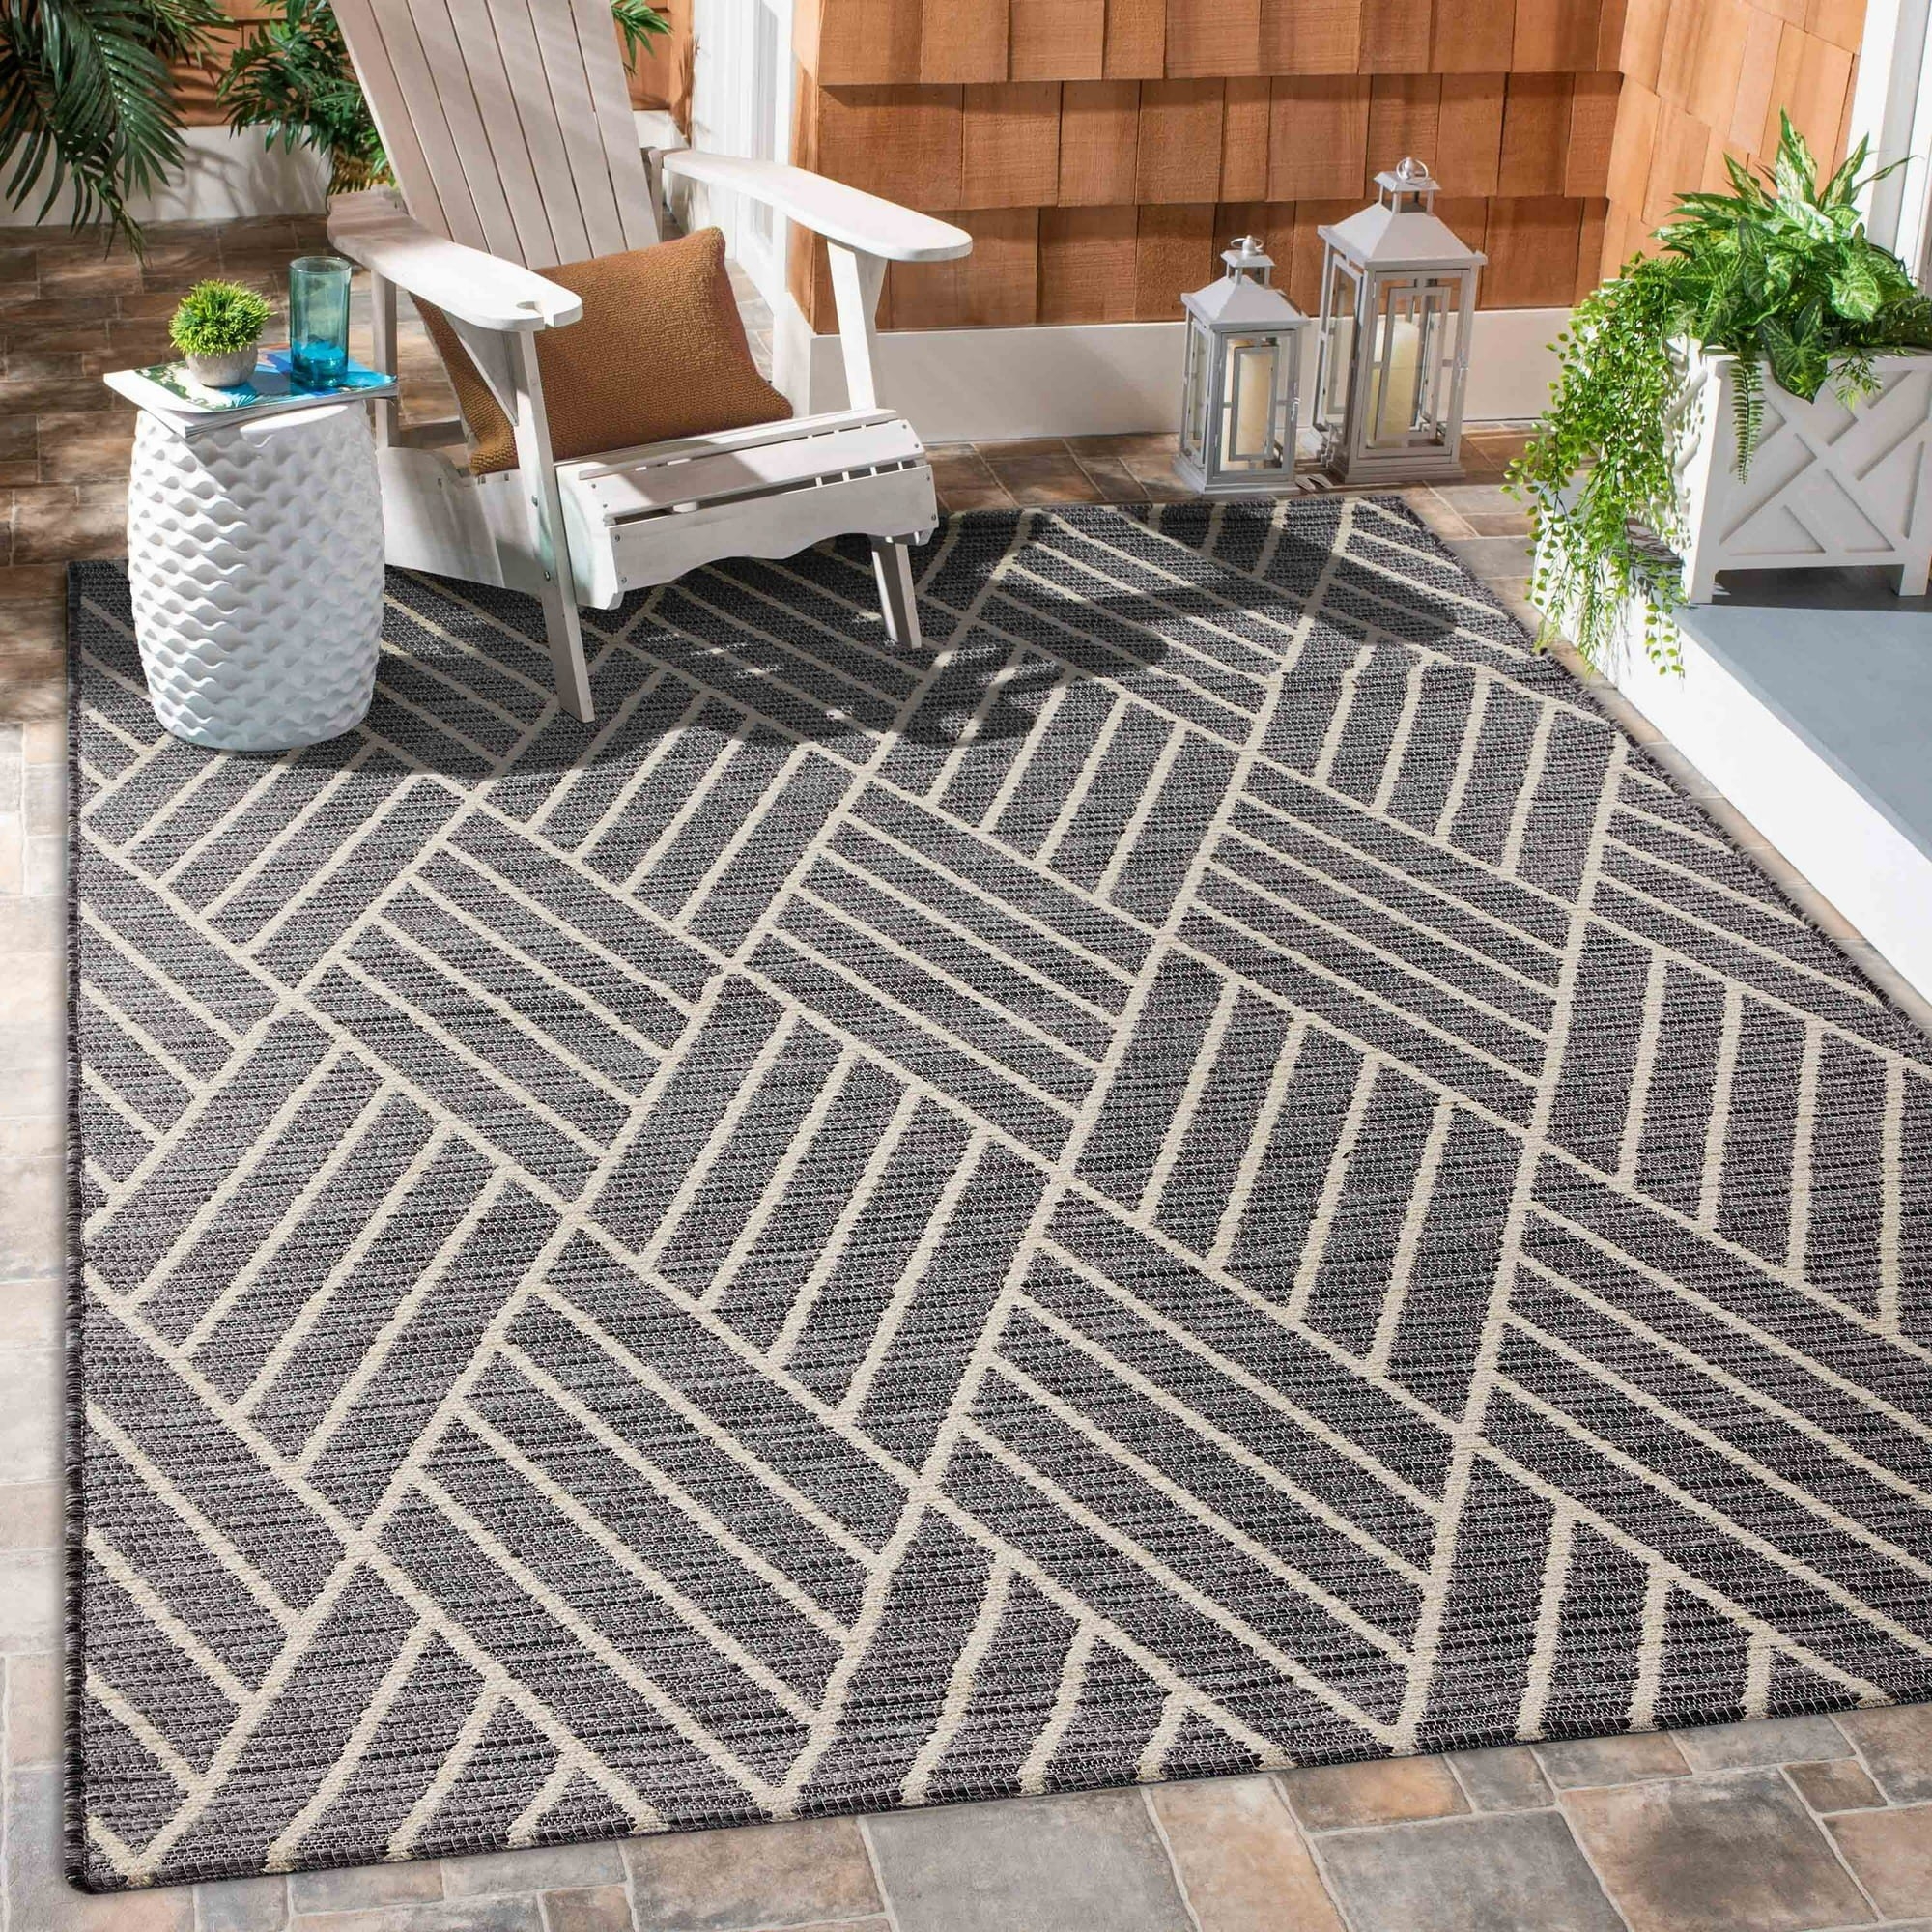 the rug with a geometric pattern on a patio